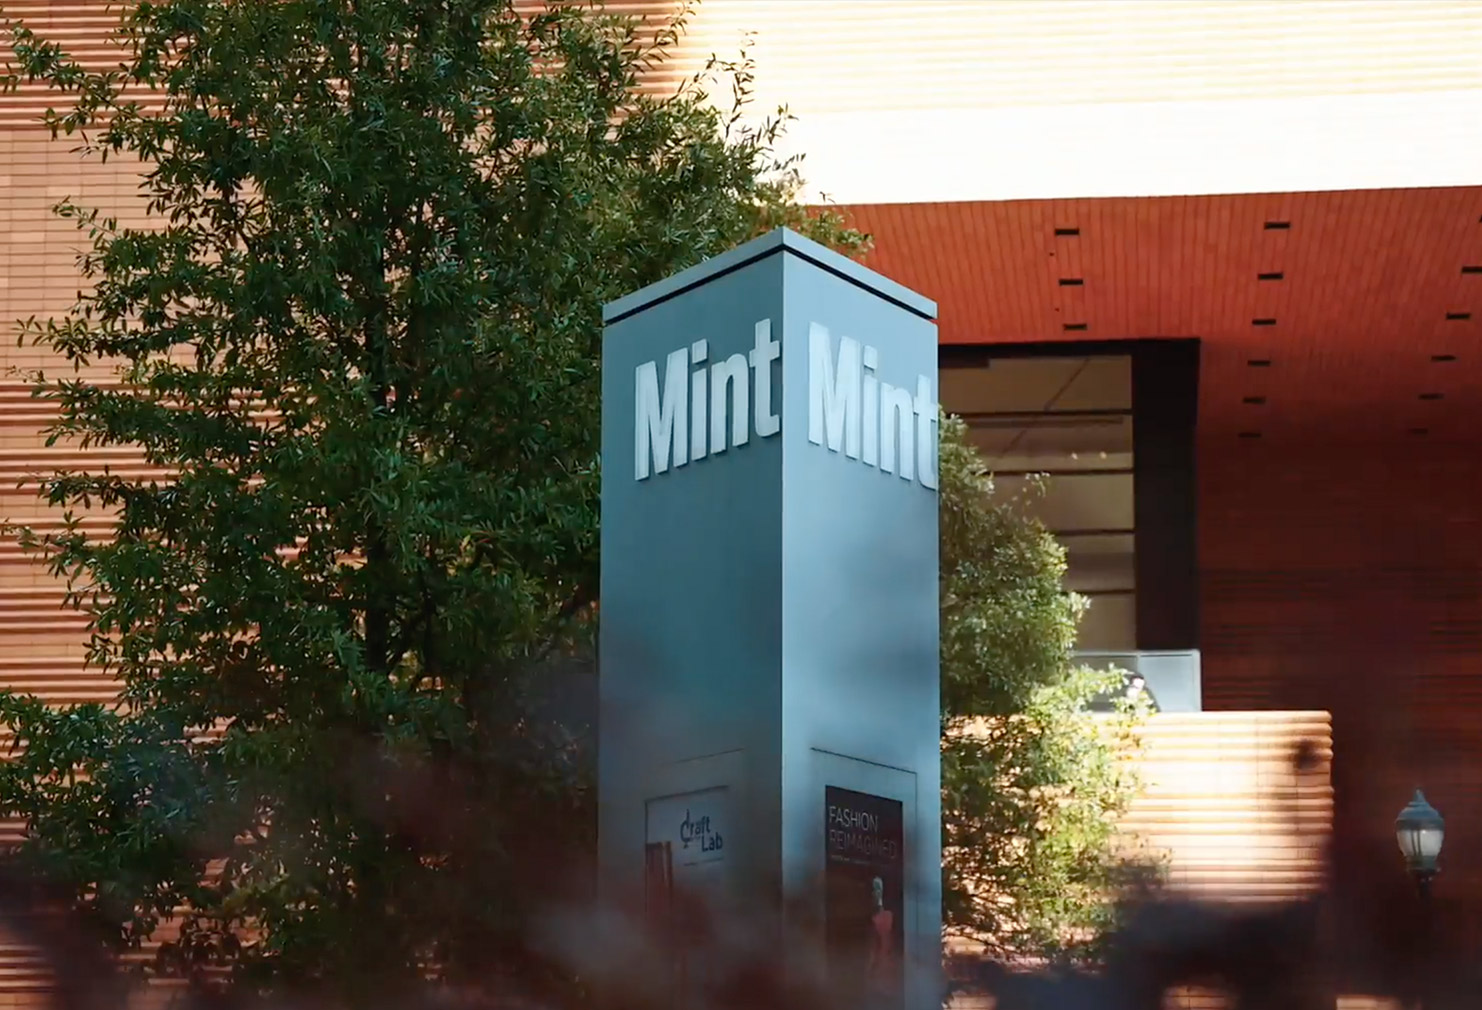 Mint Museum signage in Uptown Charlotte